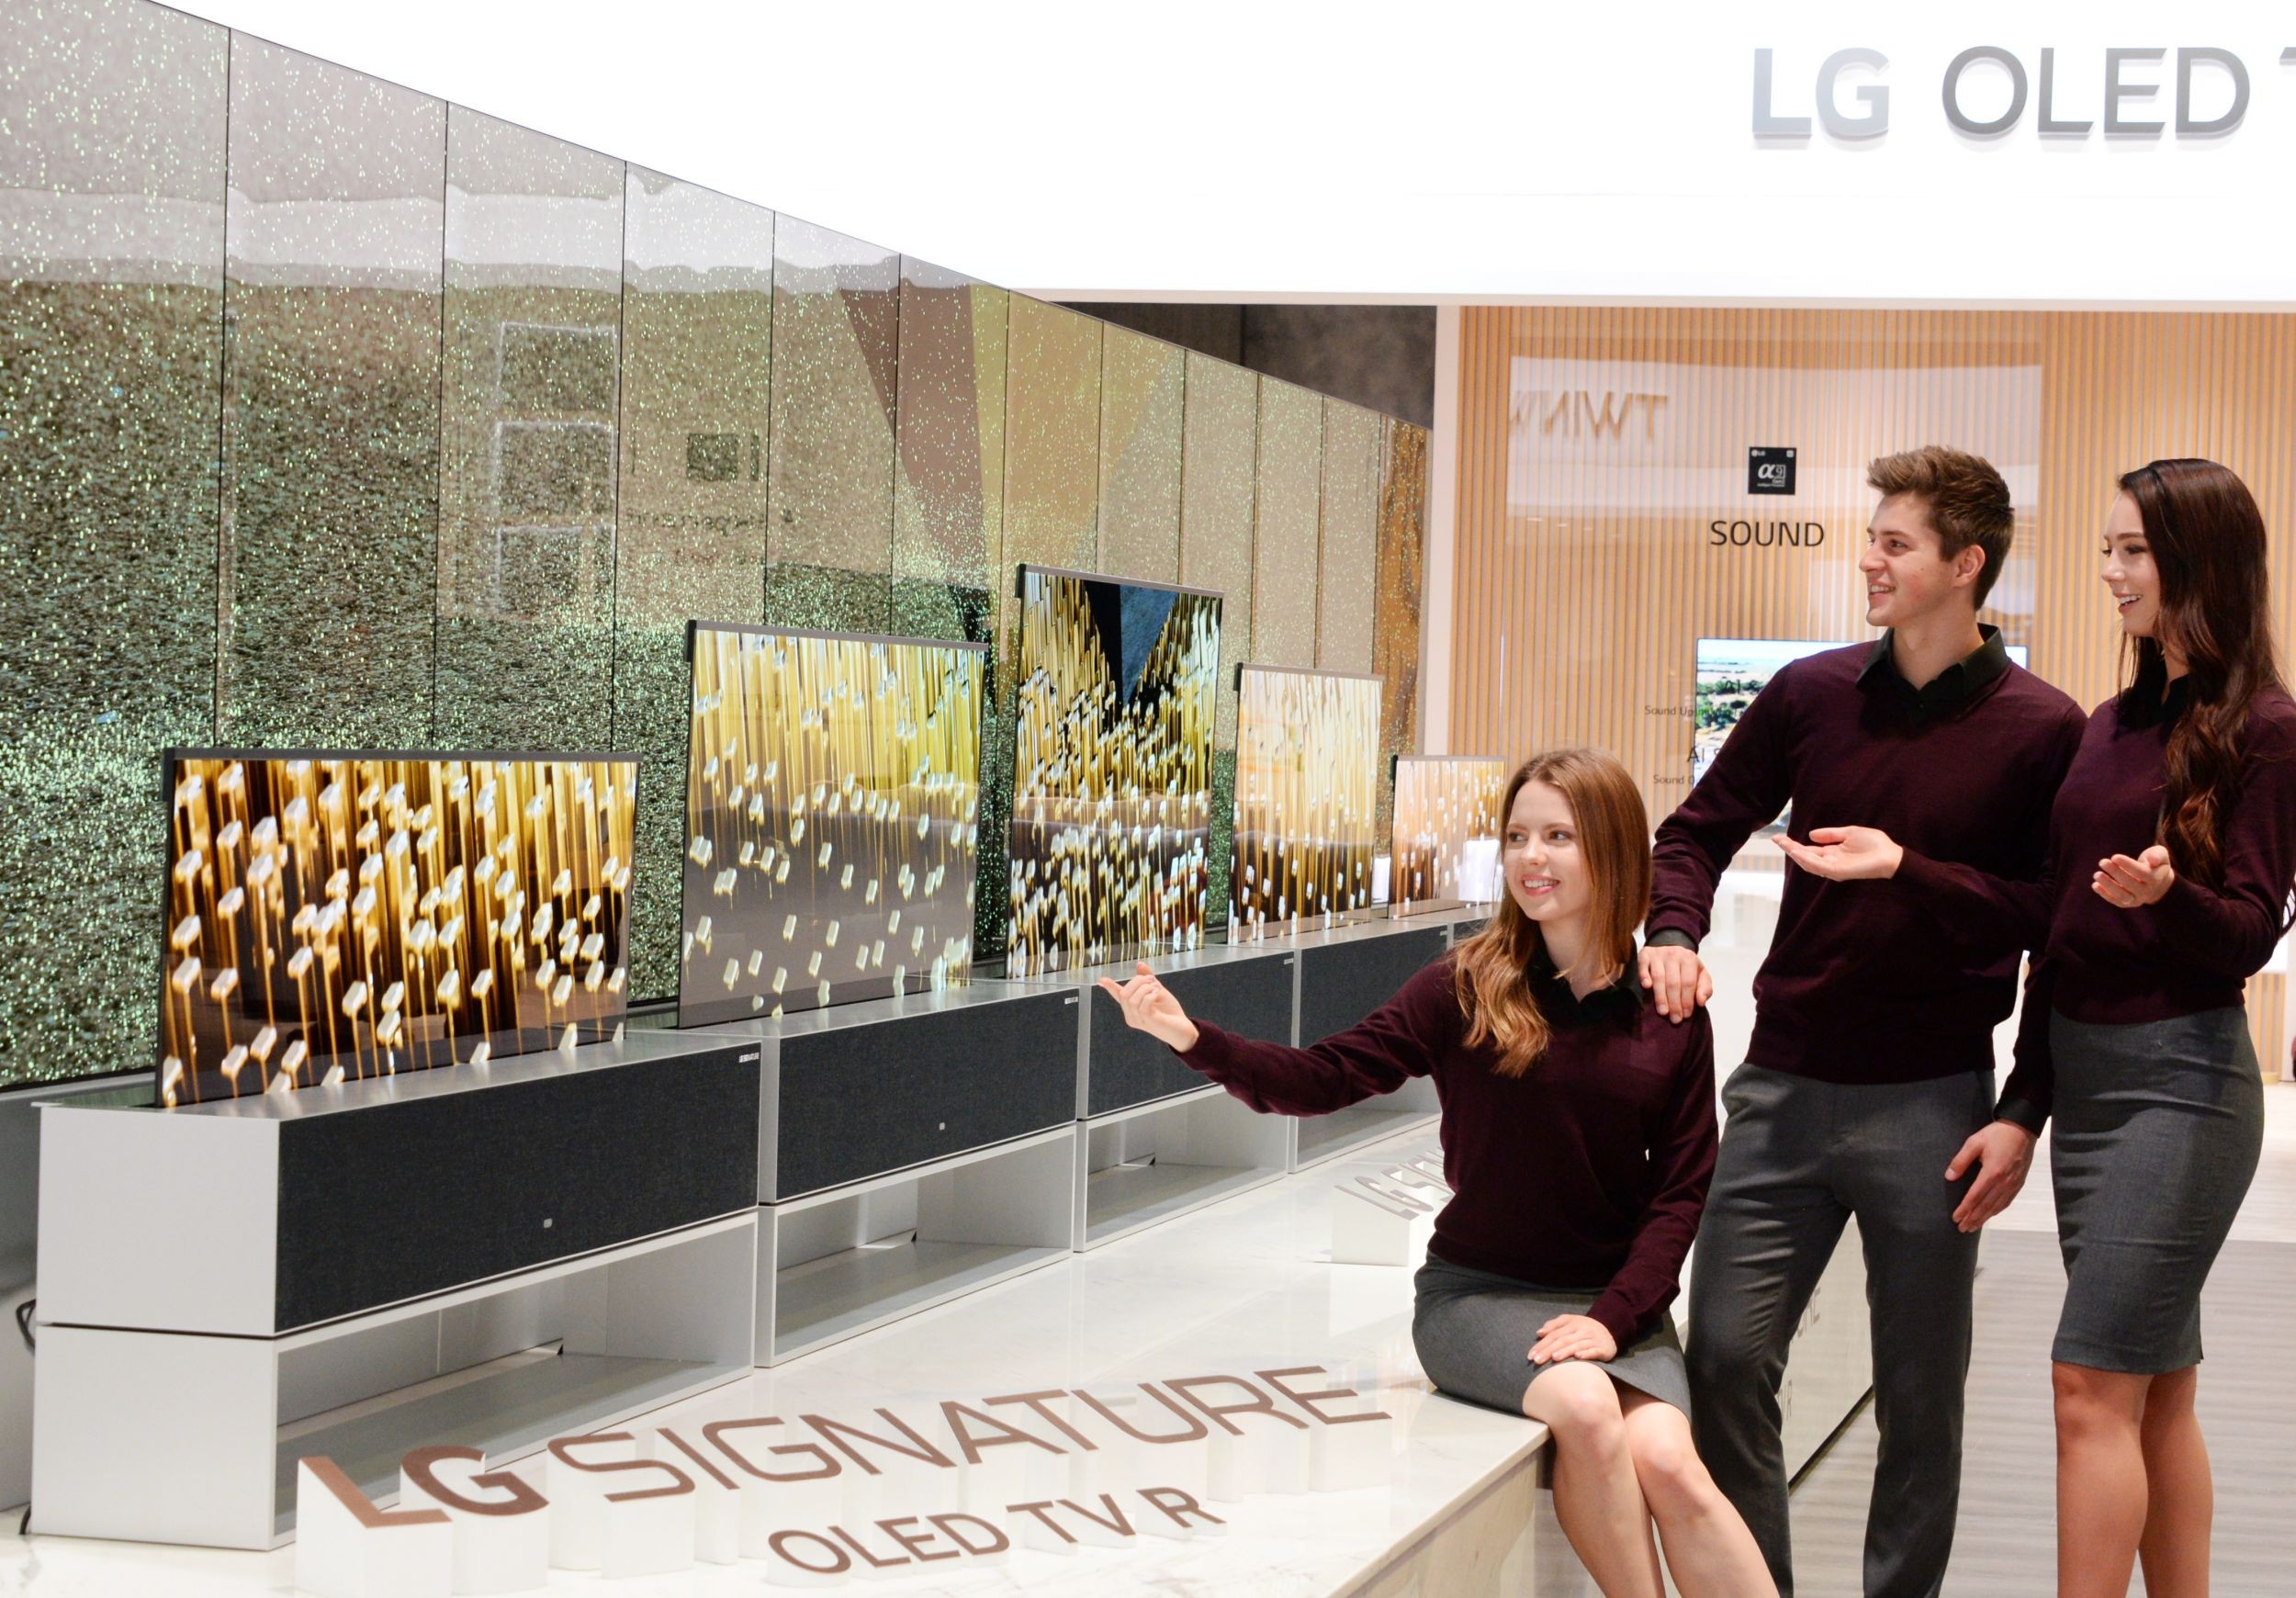 Three people are looking at LG OLED TV R on display at LG’s CES 2019 booth